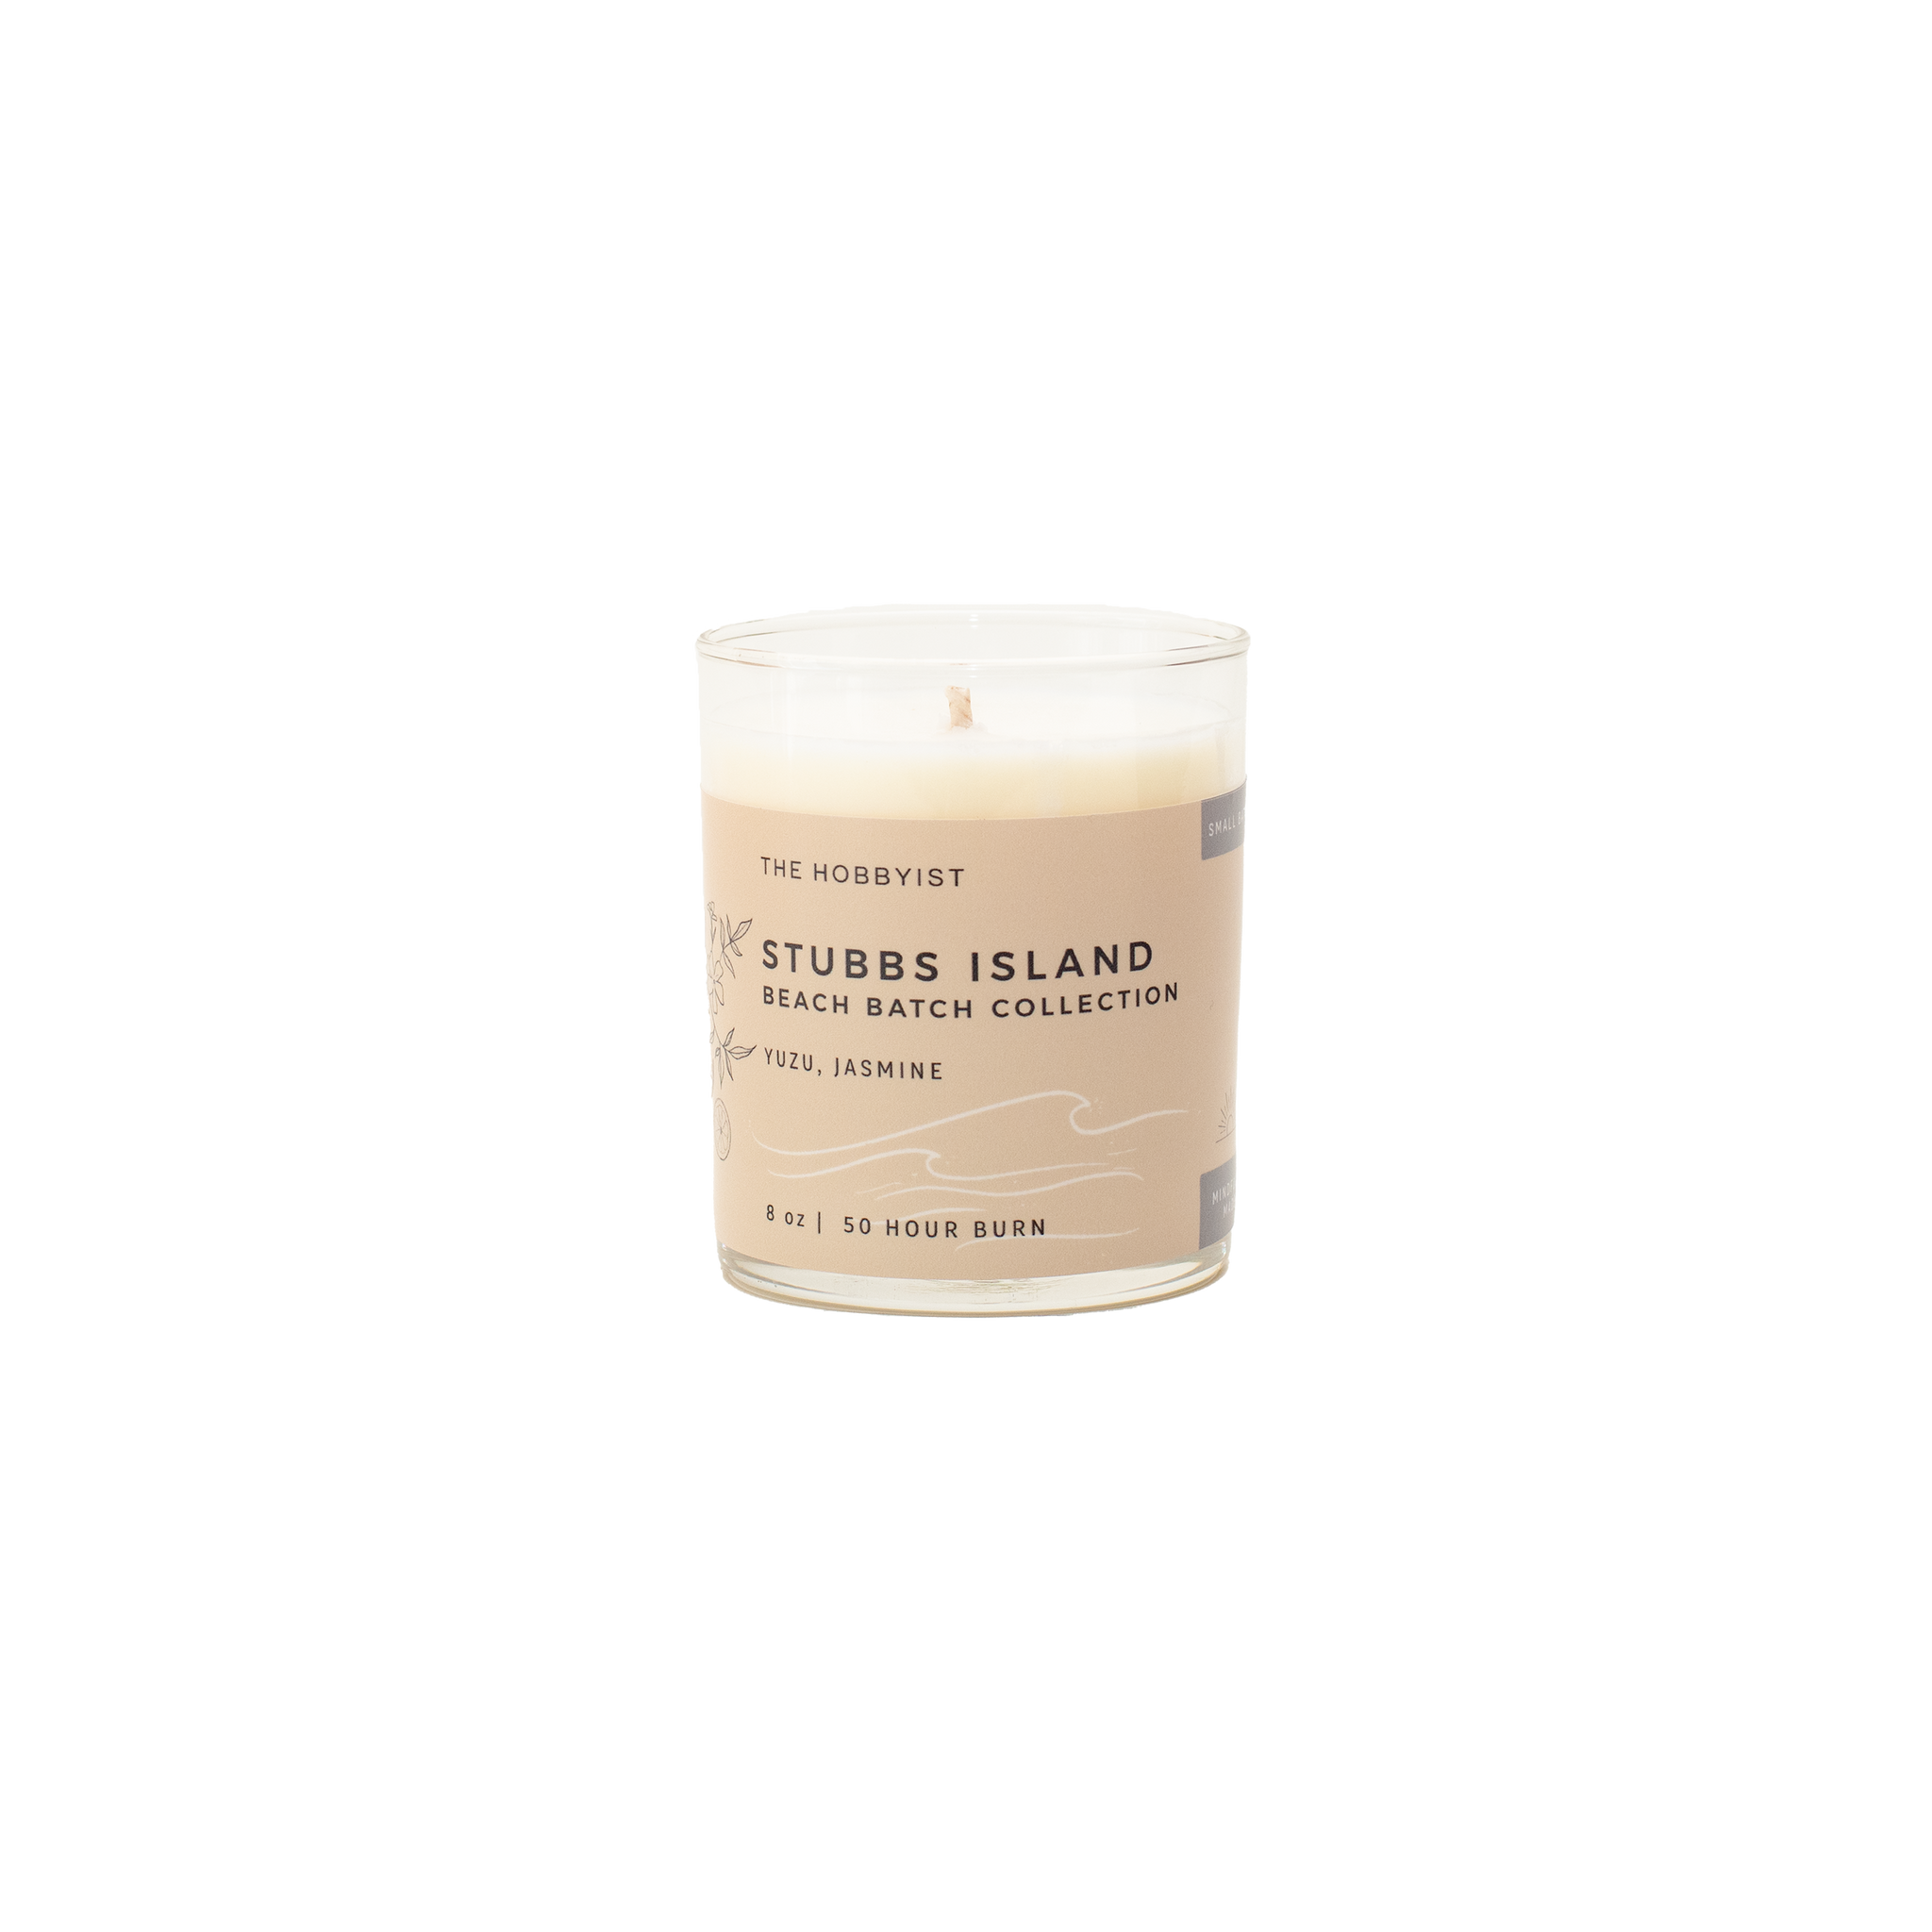 Product photo of the Stubbs Island Candle from our Beach Batch Collection